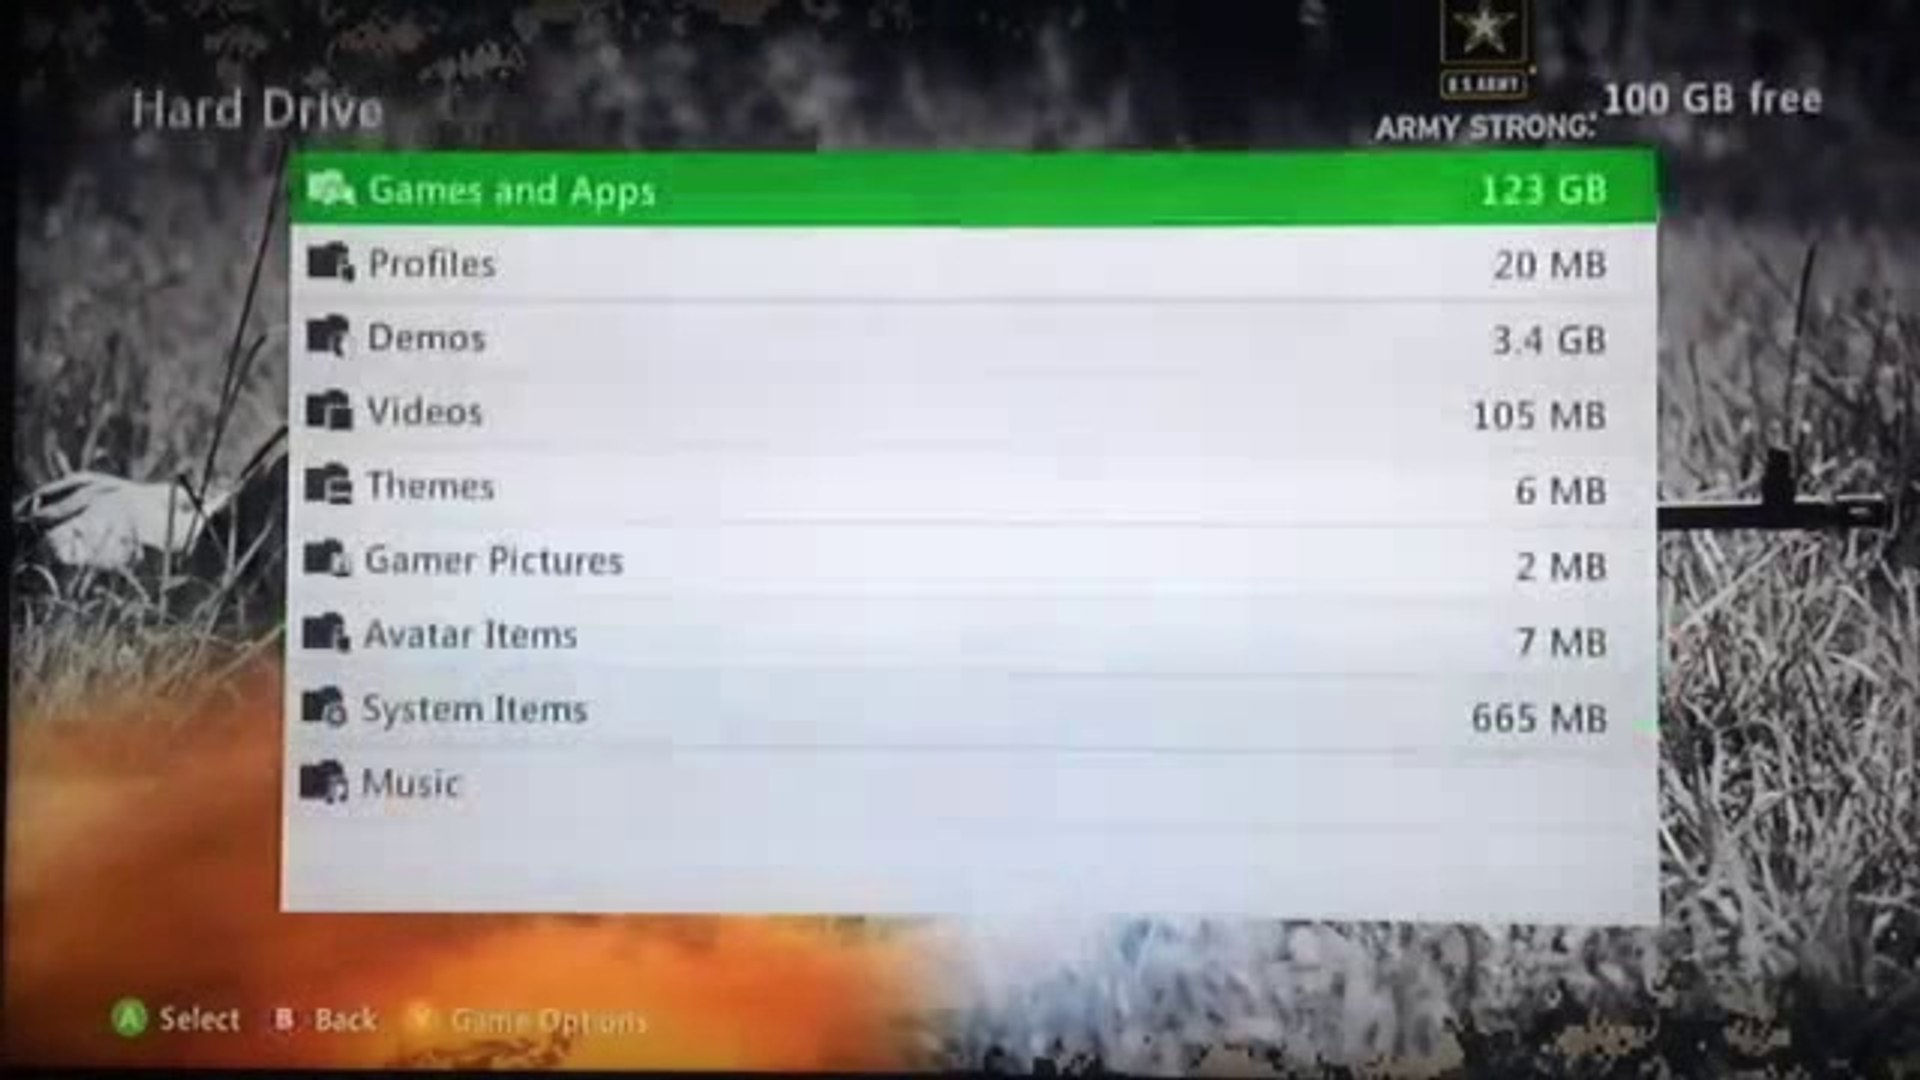 How to use Modio to mod Xbox 360 games step-by-step tutorial - video  Dailymotion